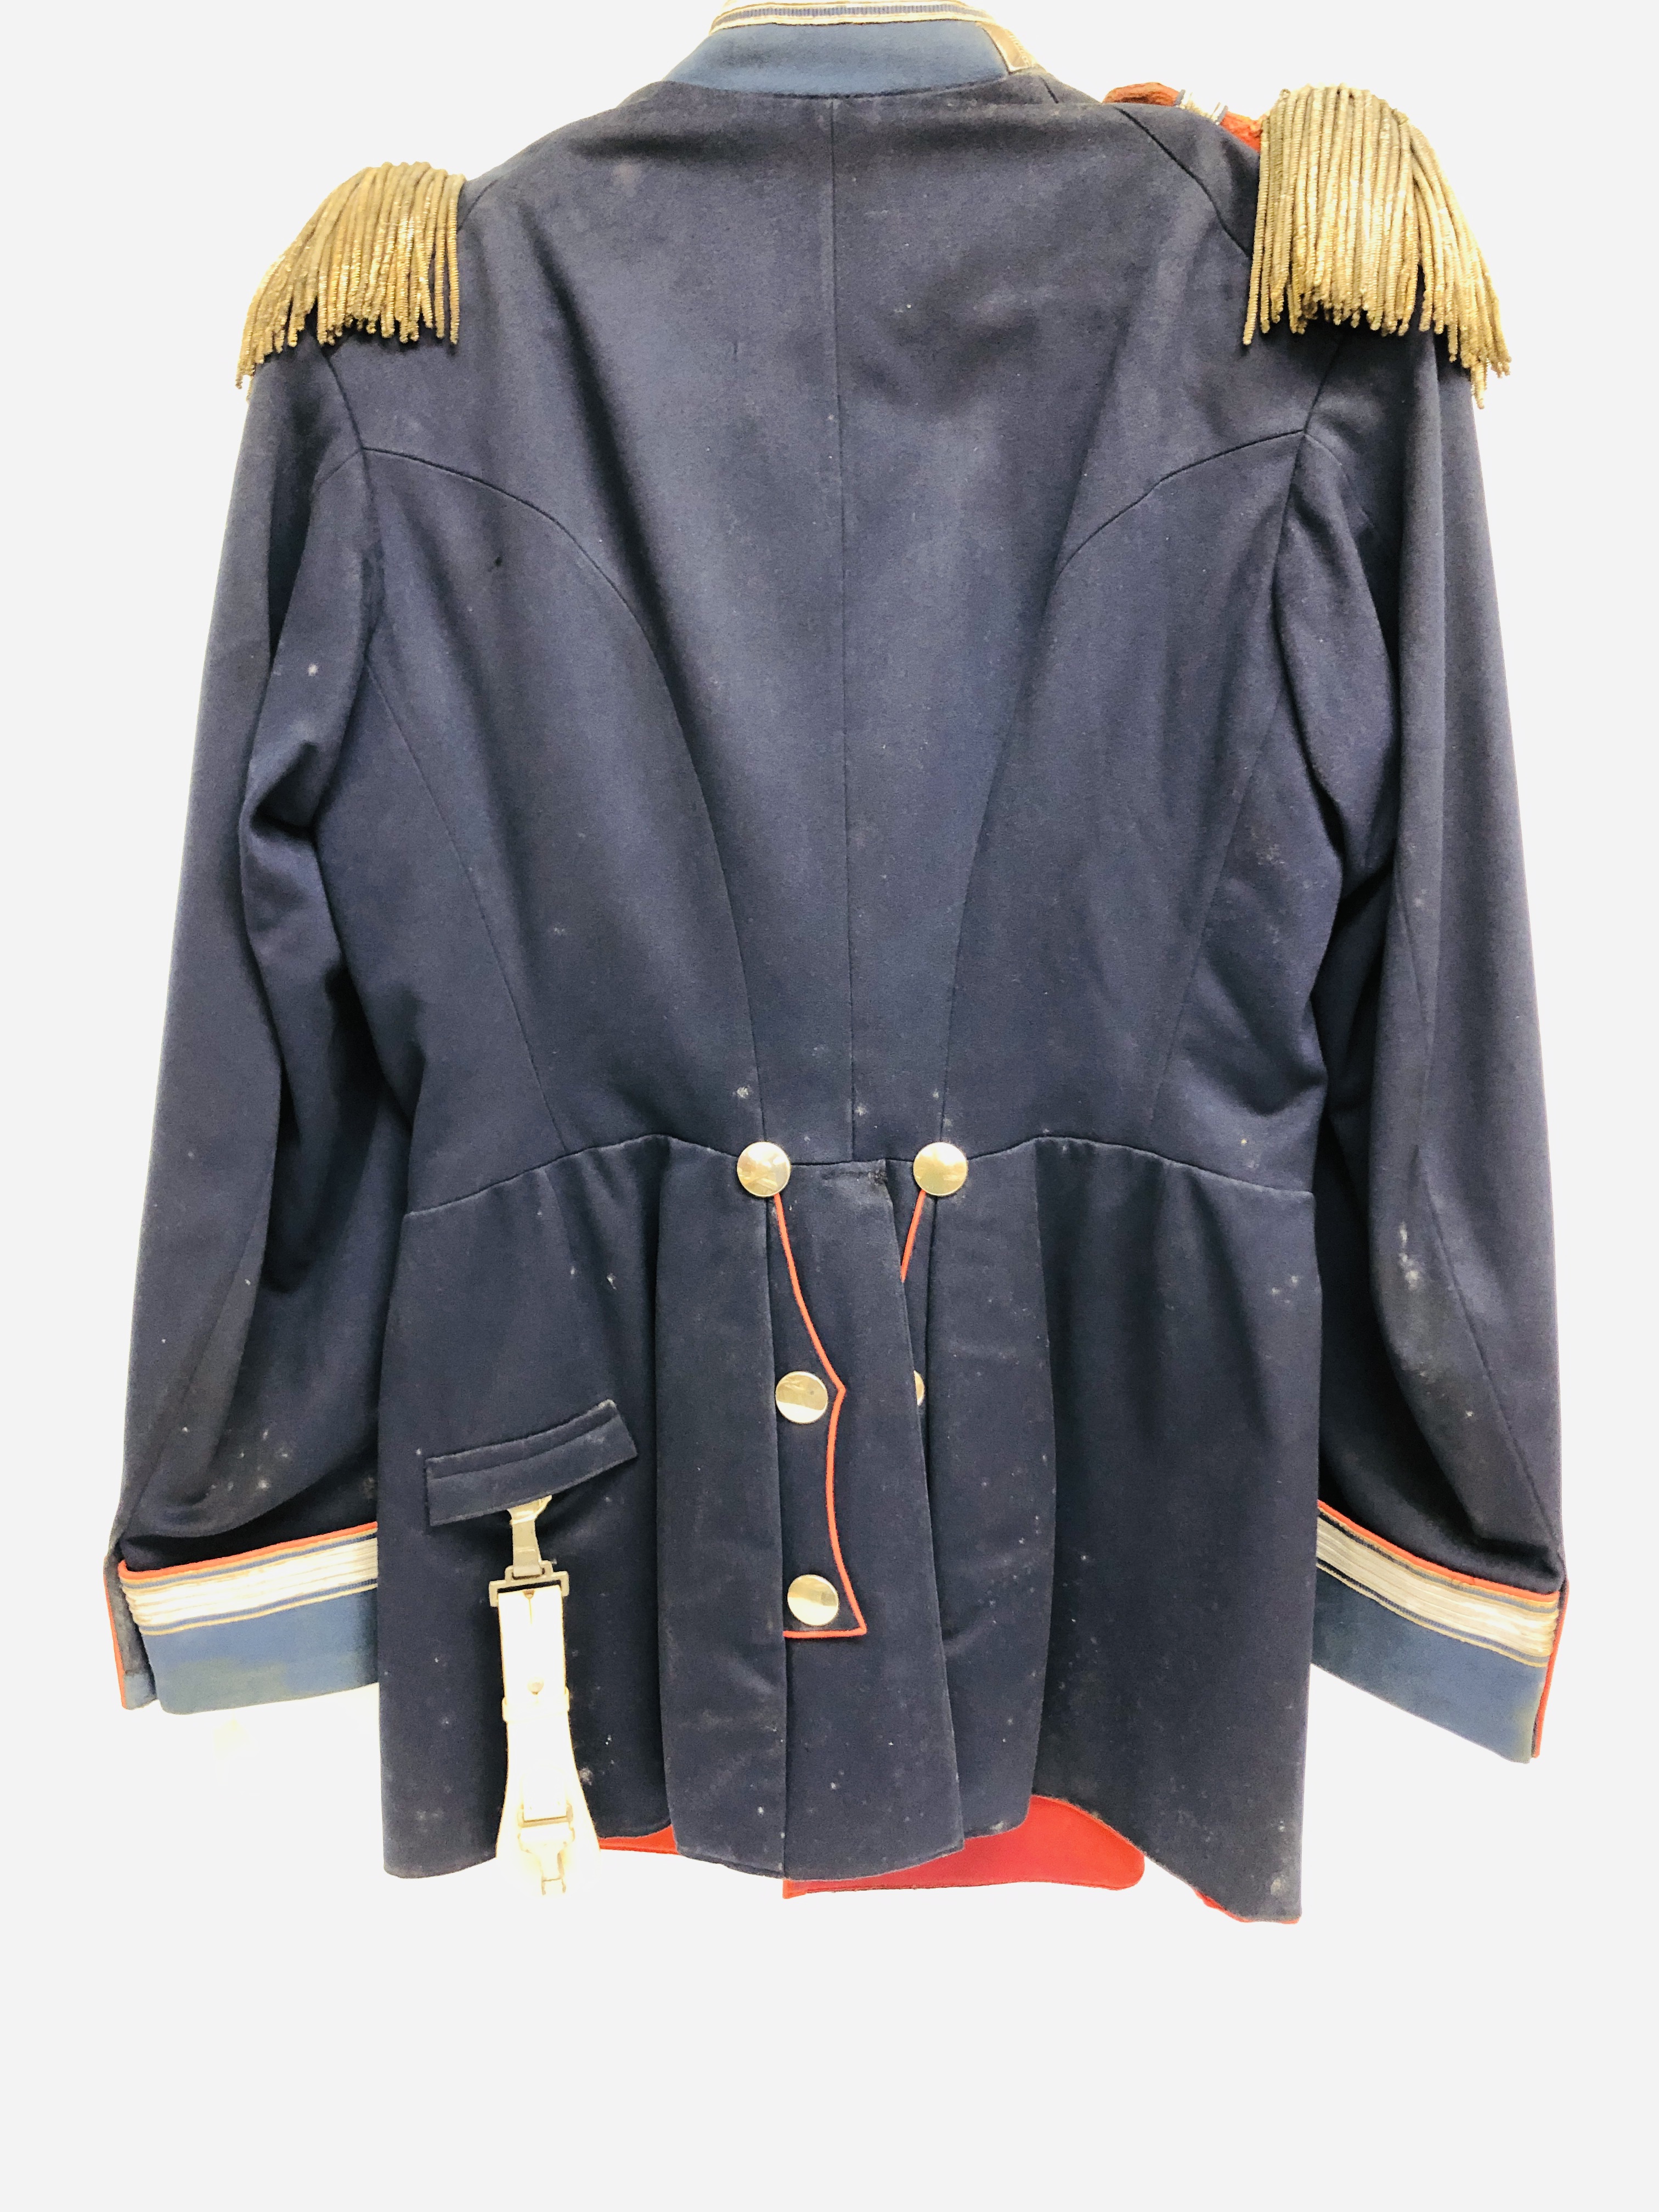 A GERMAN INFANTRY OFFICERS JACKET IN NAVY CLOTH, - Image 20 of 32